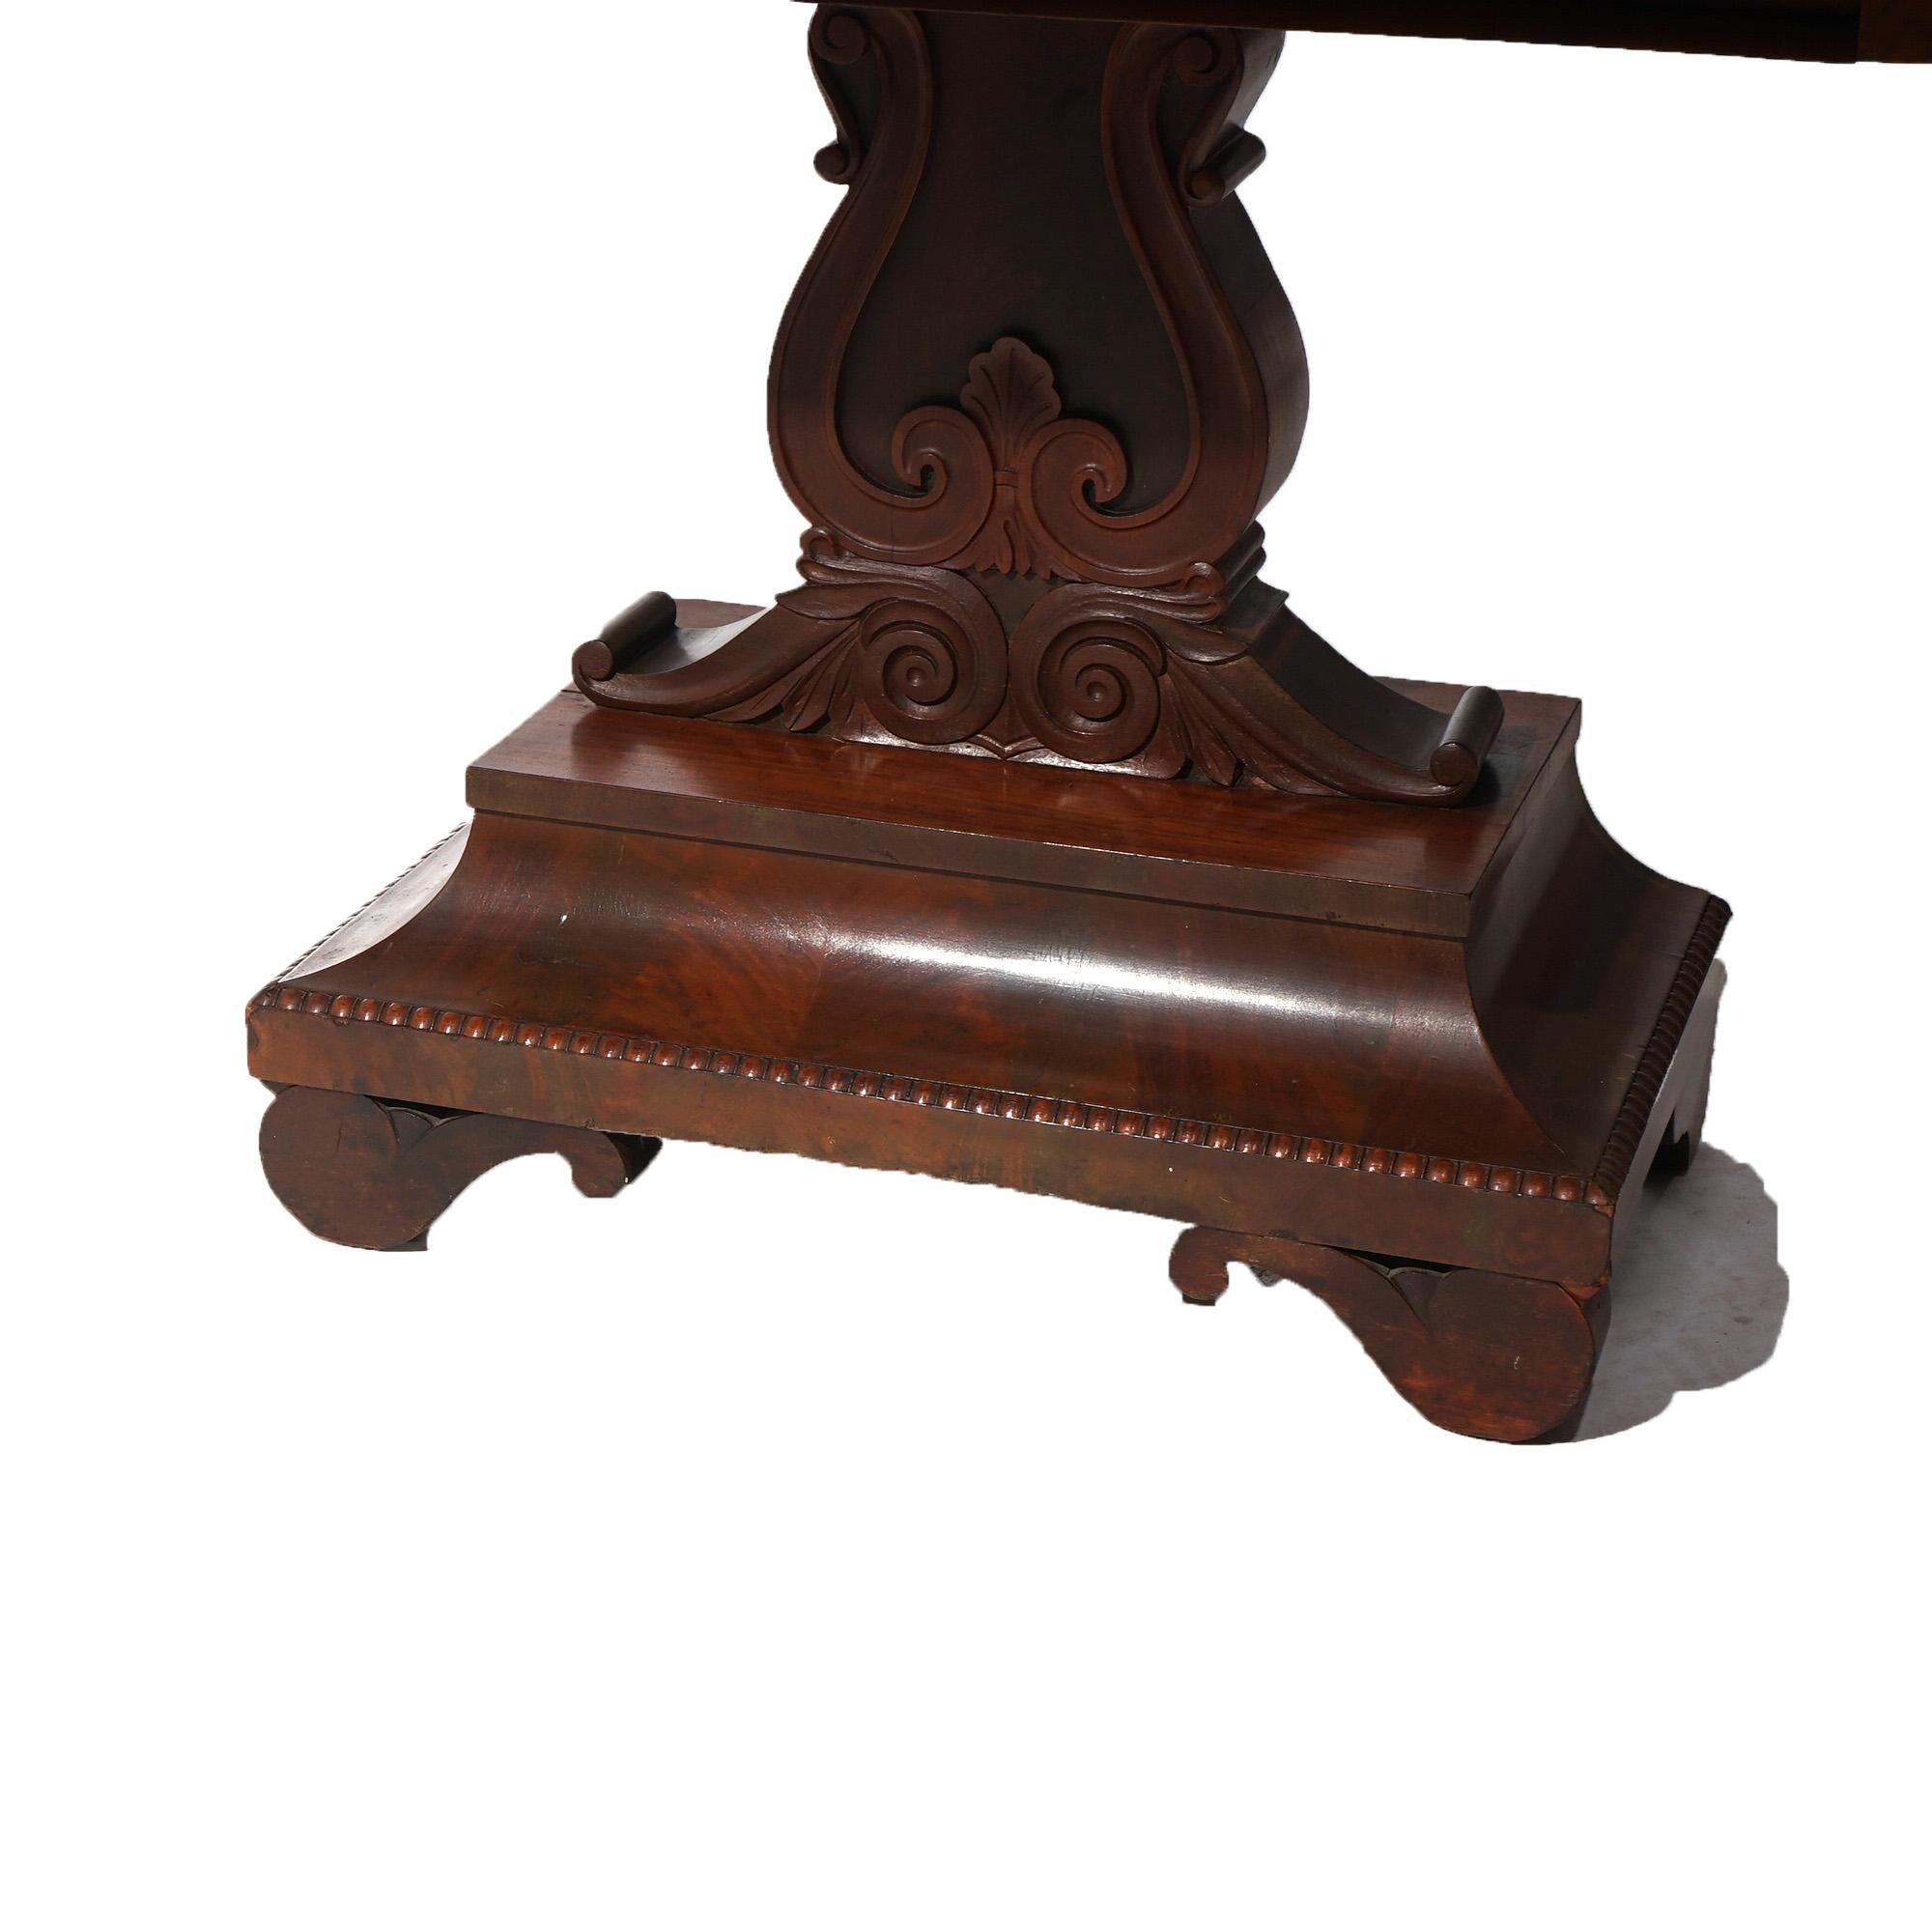 Antique American Empire Neoclassical Greco Flame Mahogany Card Table C1840 For Sale 8